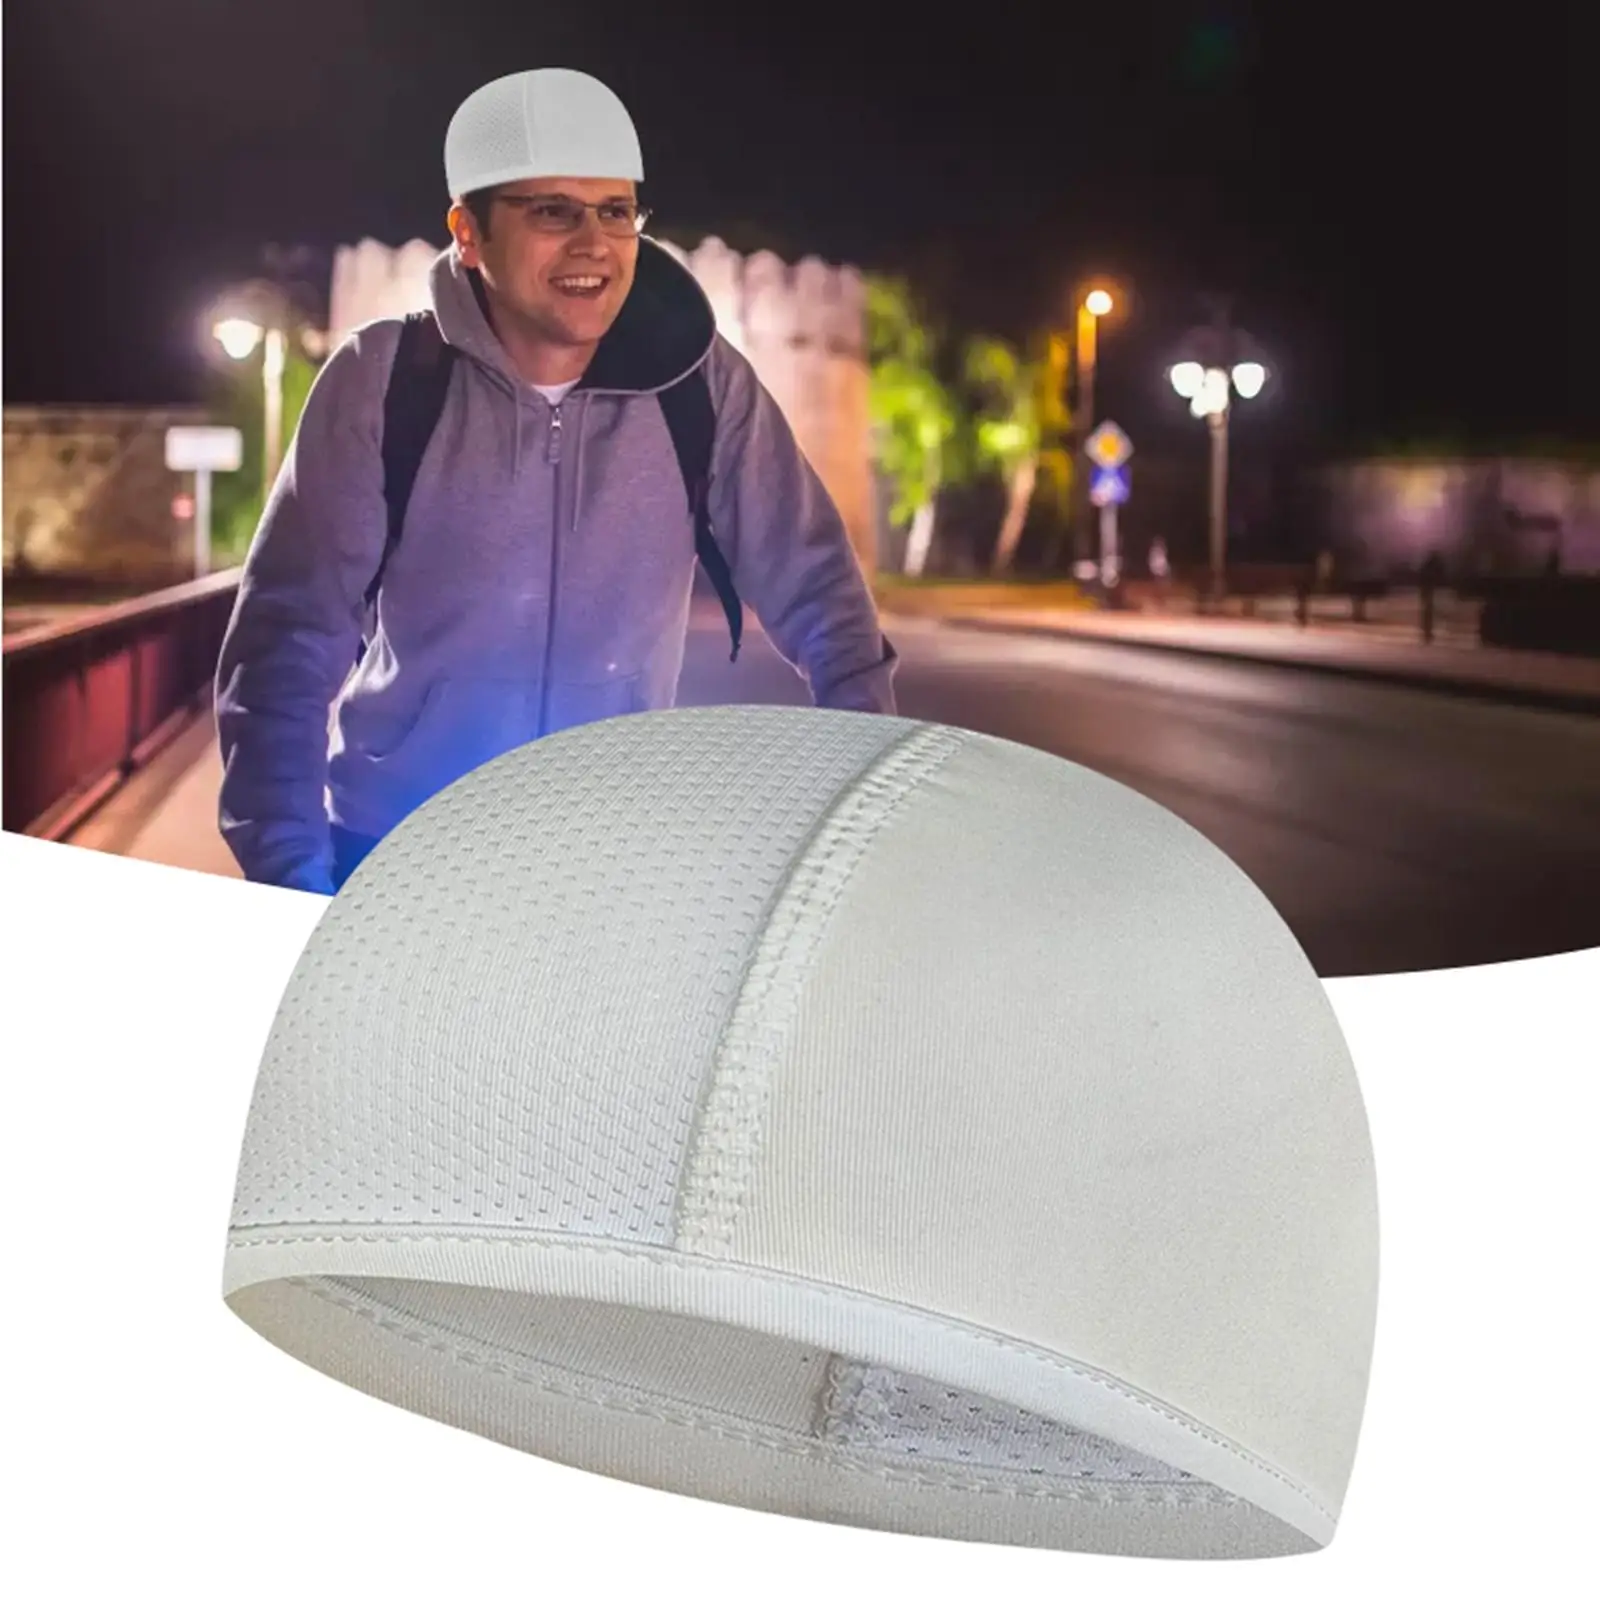 Unisex Cycling Caps Sweat Wicking Helmet Liner Mesh Breathable Beanie Cooling